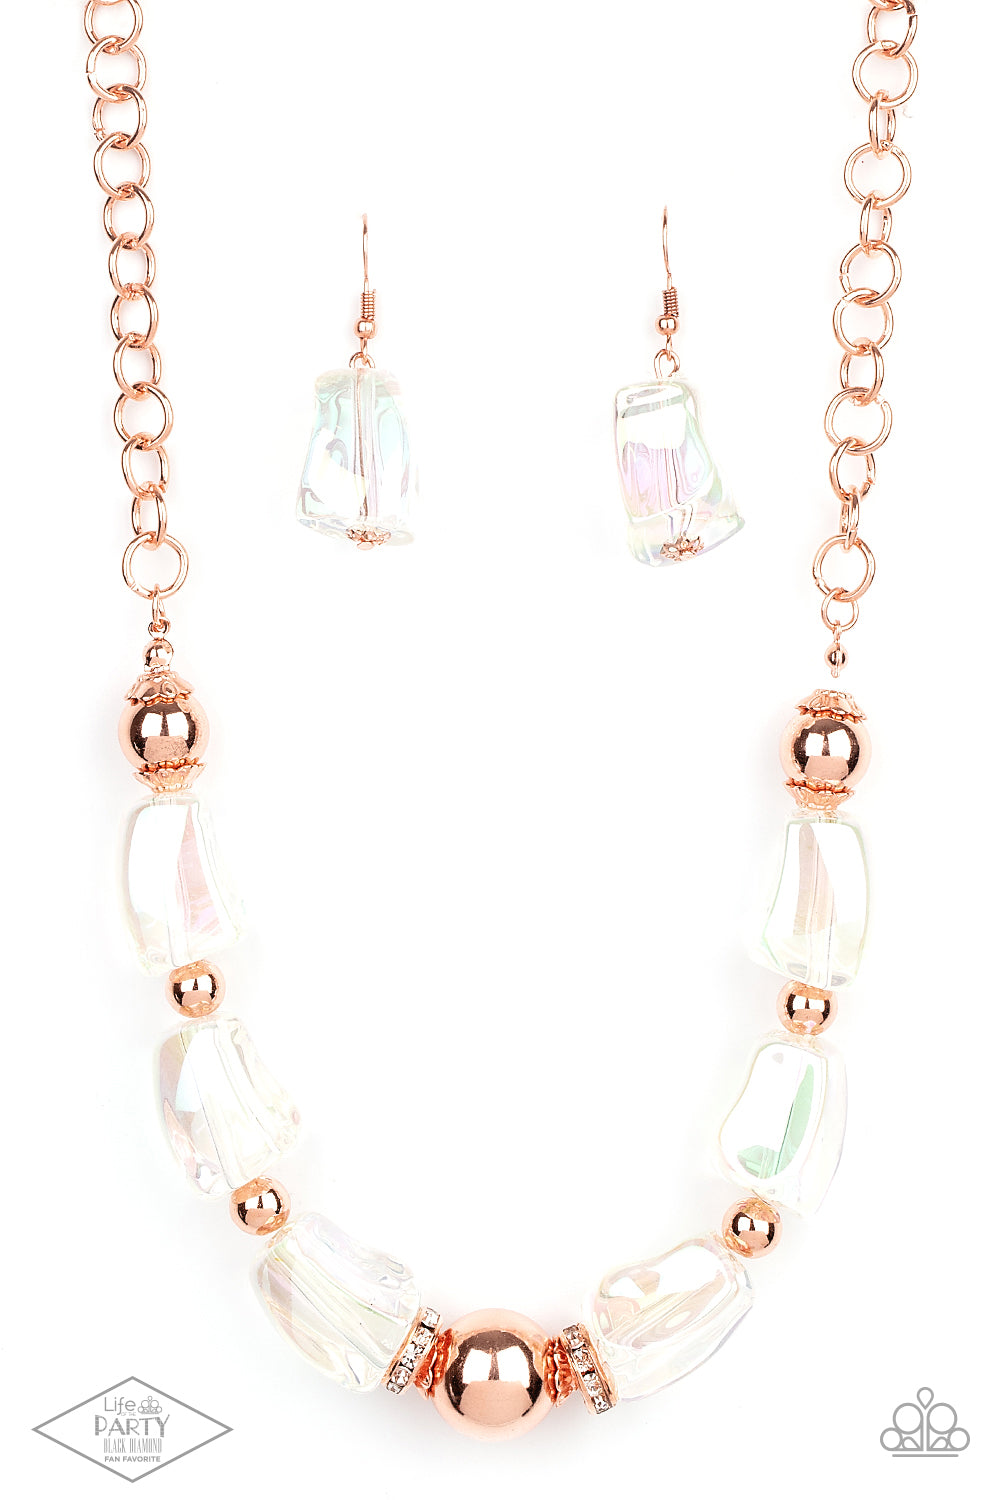 LOP - Iridescently Ice Queen - Copper Necklace